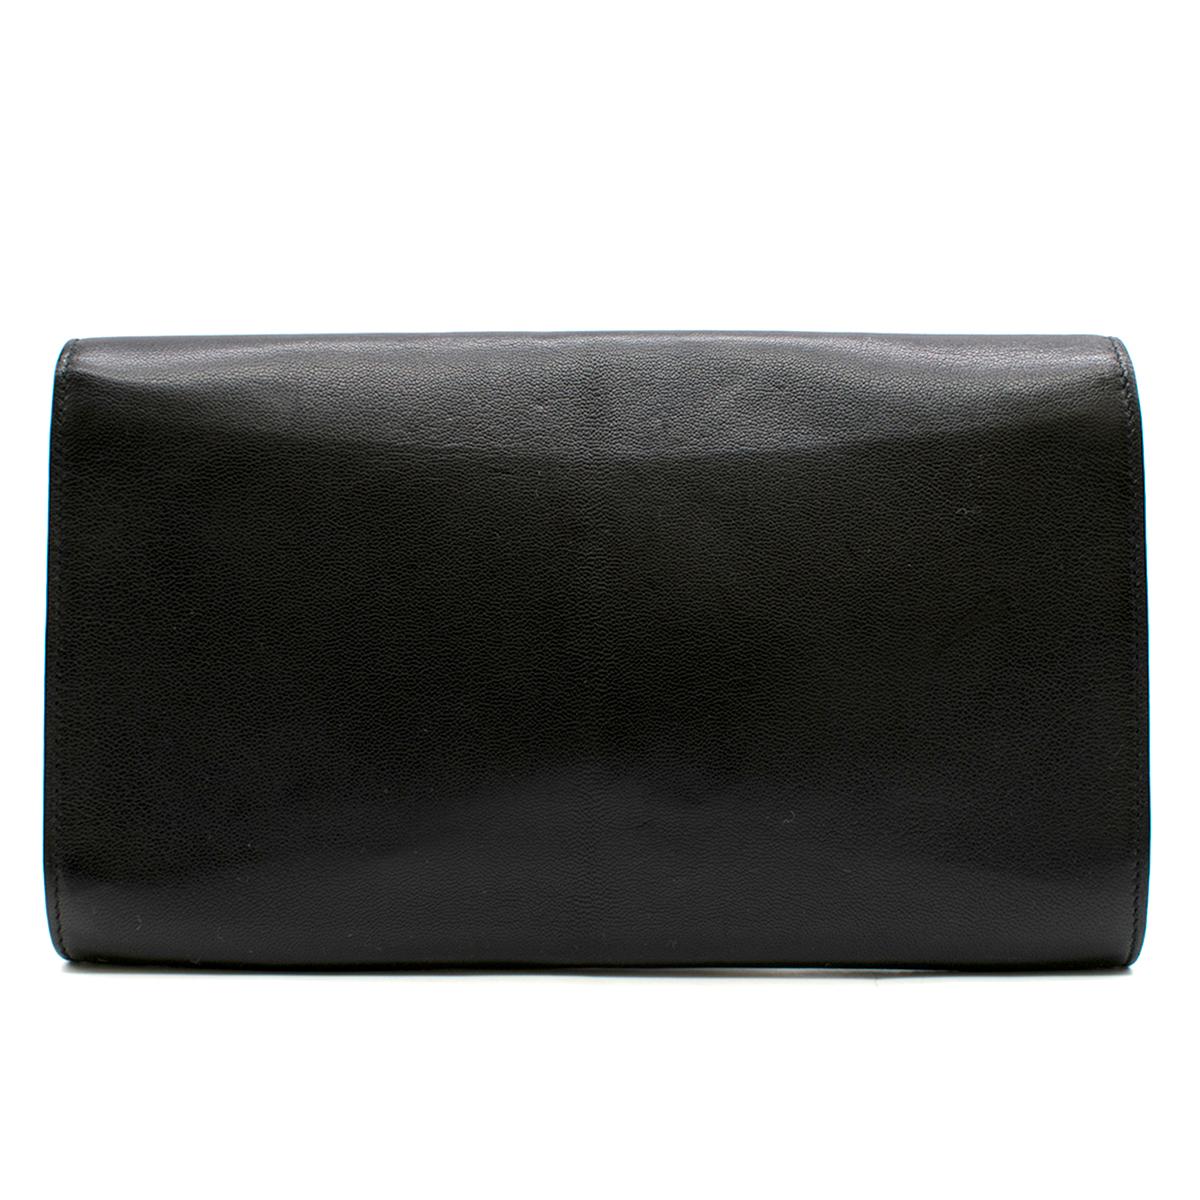 Saint Laurent Belle De Jour Black Leather Clutch Bag 

- Black Clutch Bag 
- Leather body, strapless
- Flap front with magnetic fastening closure 
- Featured stitched logo at front 
- Black satin lining with internal side slip pocket

This item has